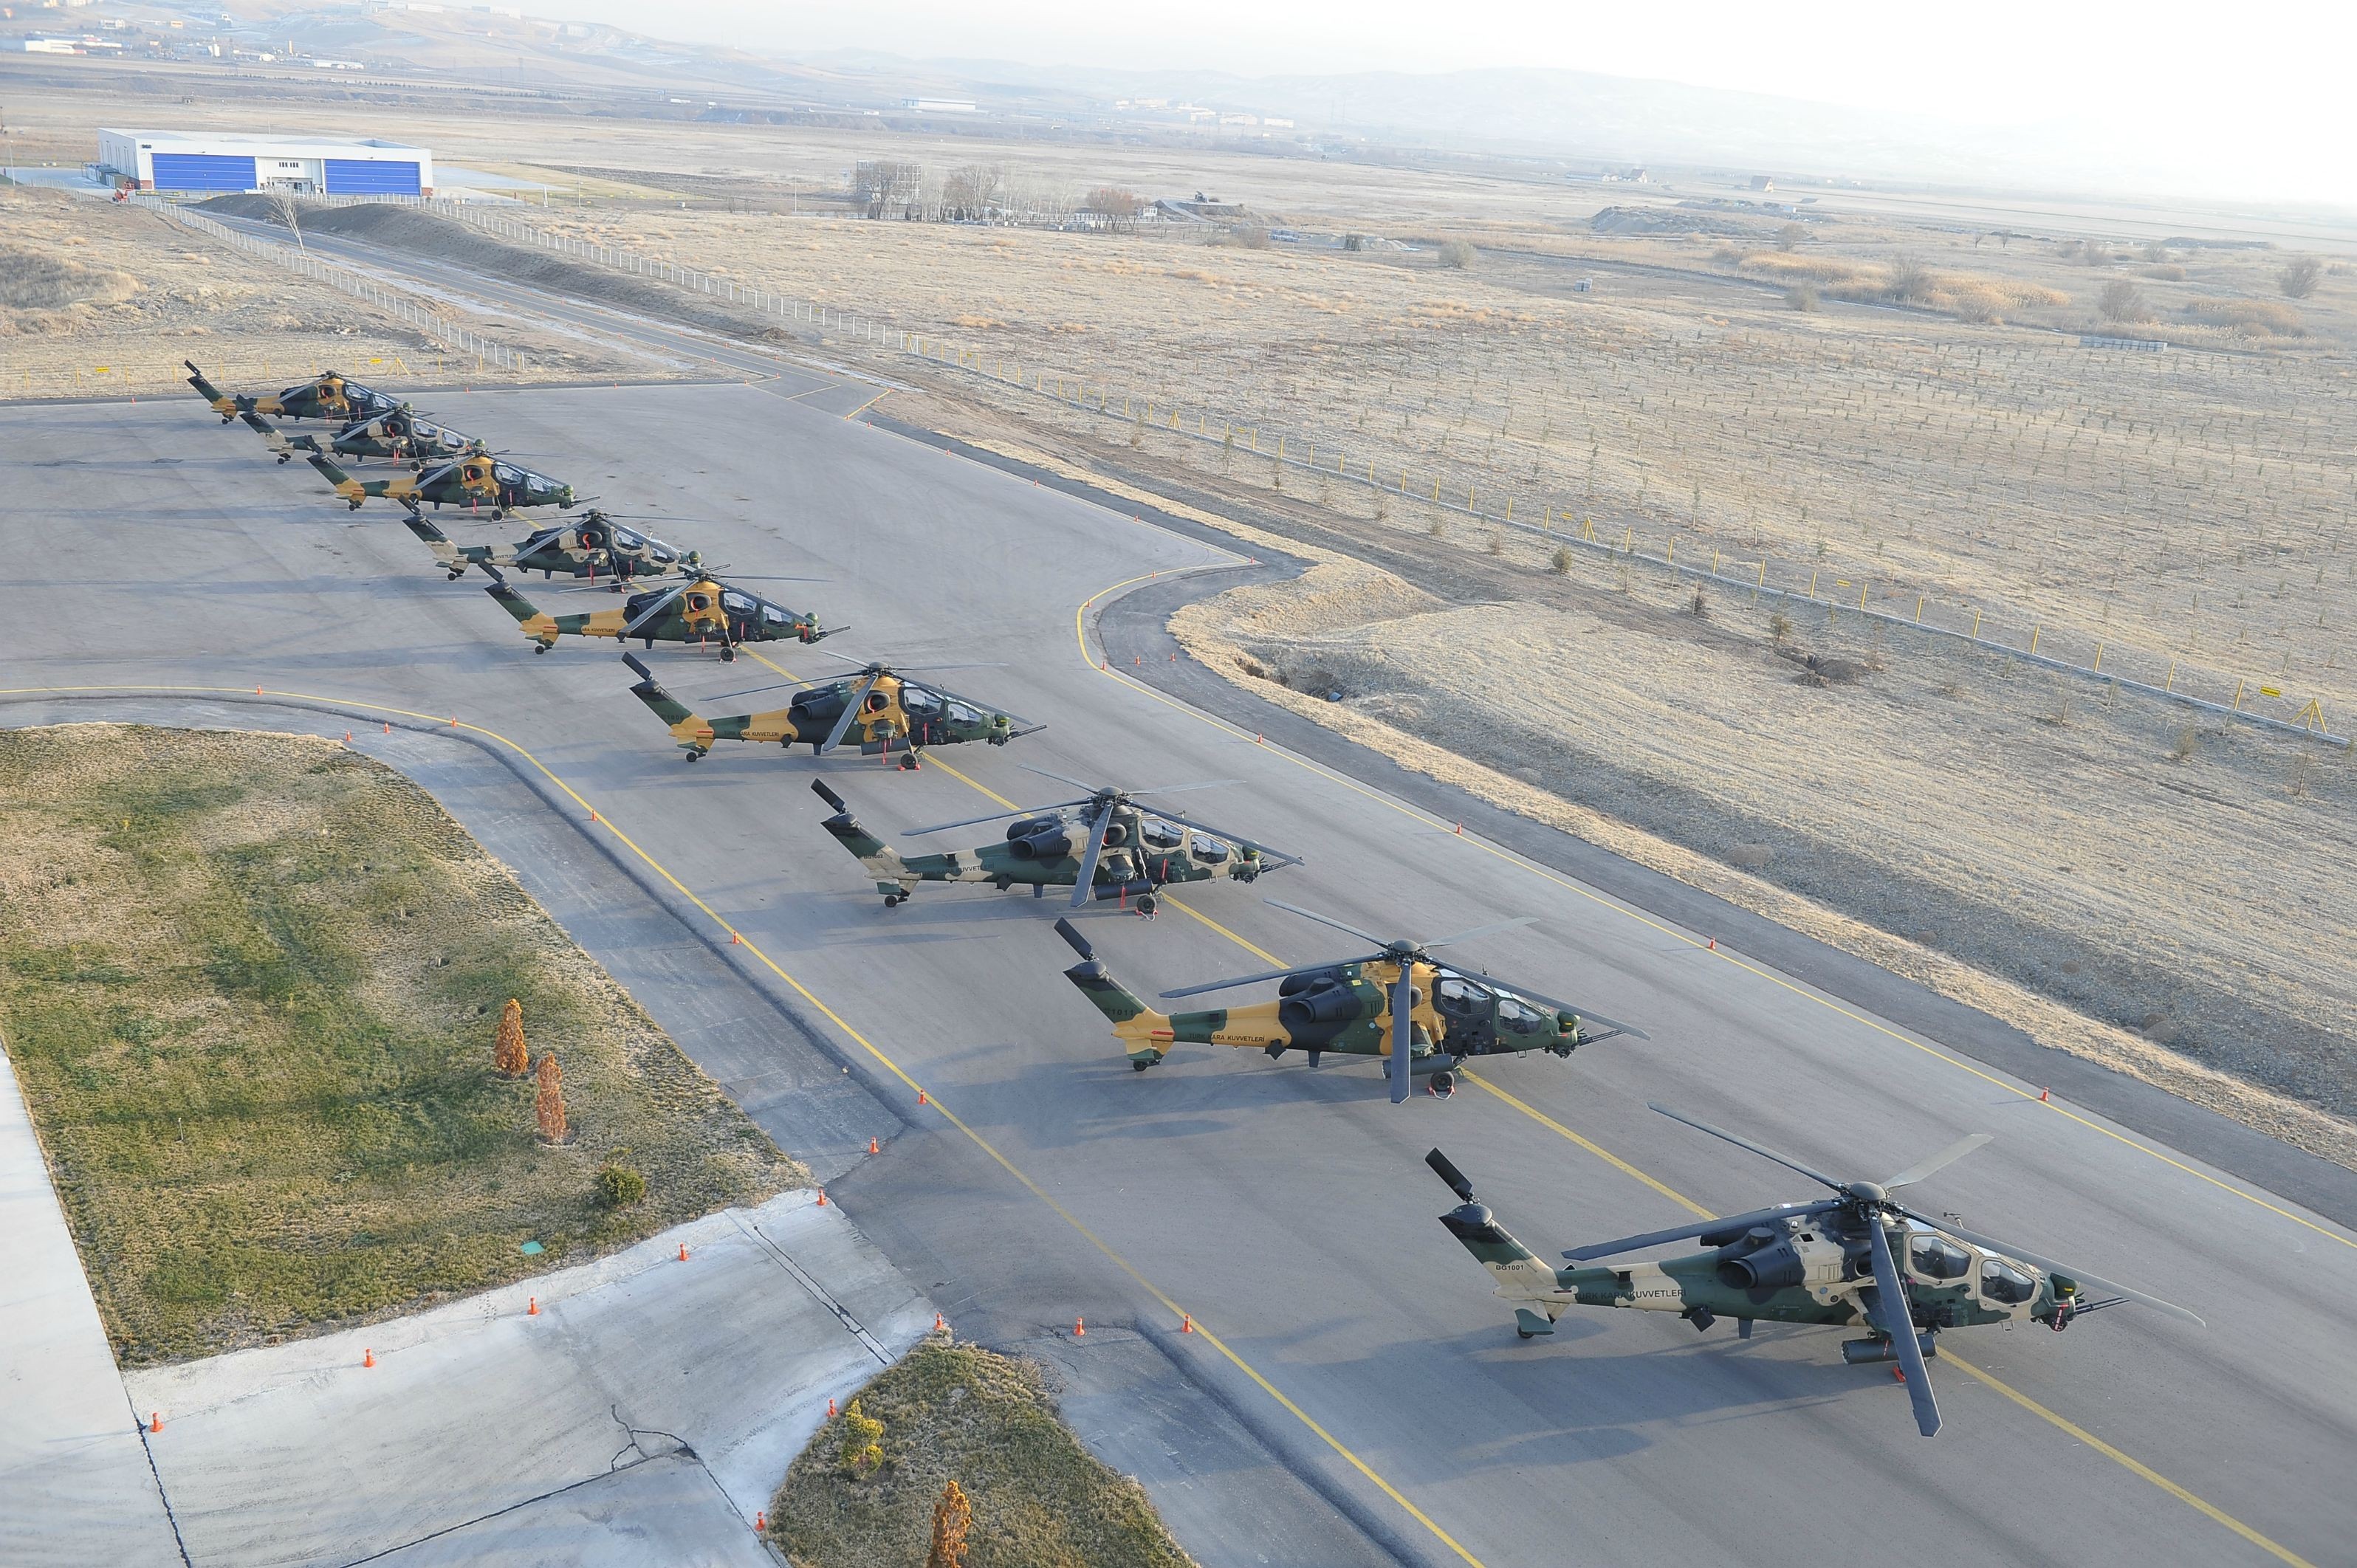 Helicopters TAi AgustaWestland T129 Aircraft Military Aircraft Turkish Armed Forces 3192x2124